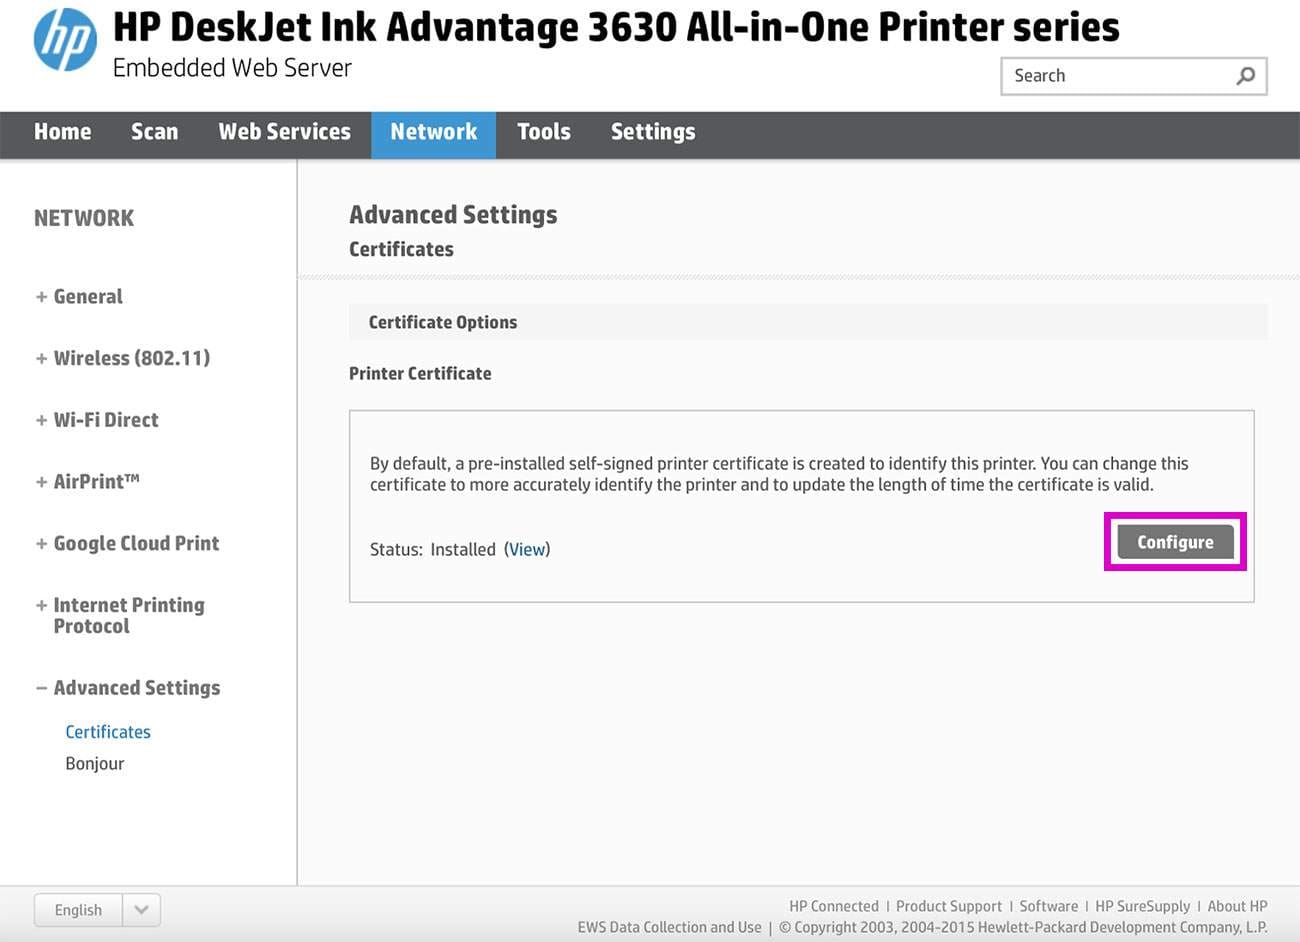 Fixes for No AirPrint Printers Found - 10